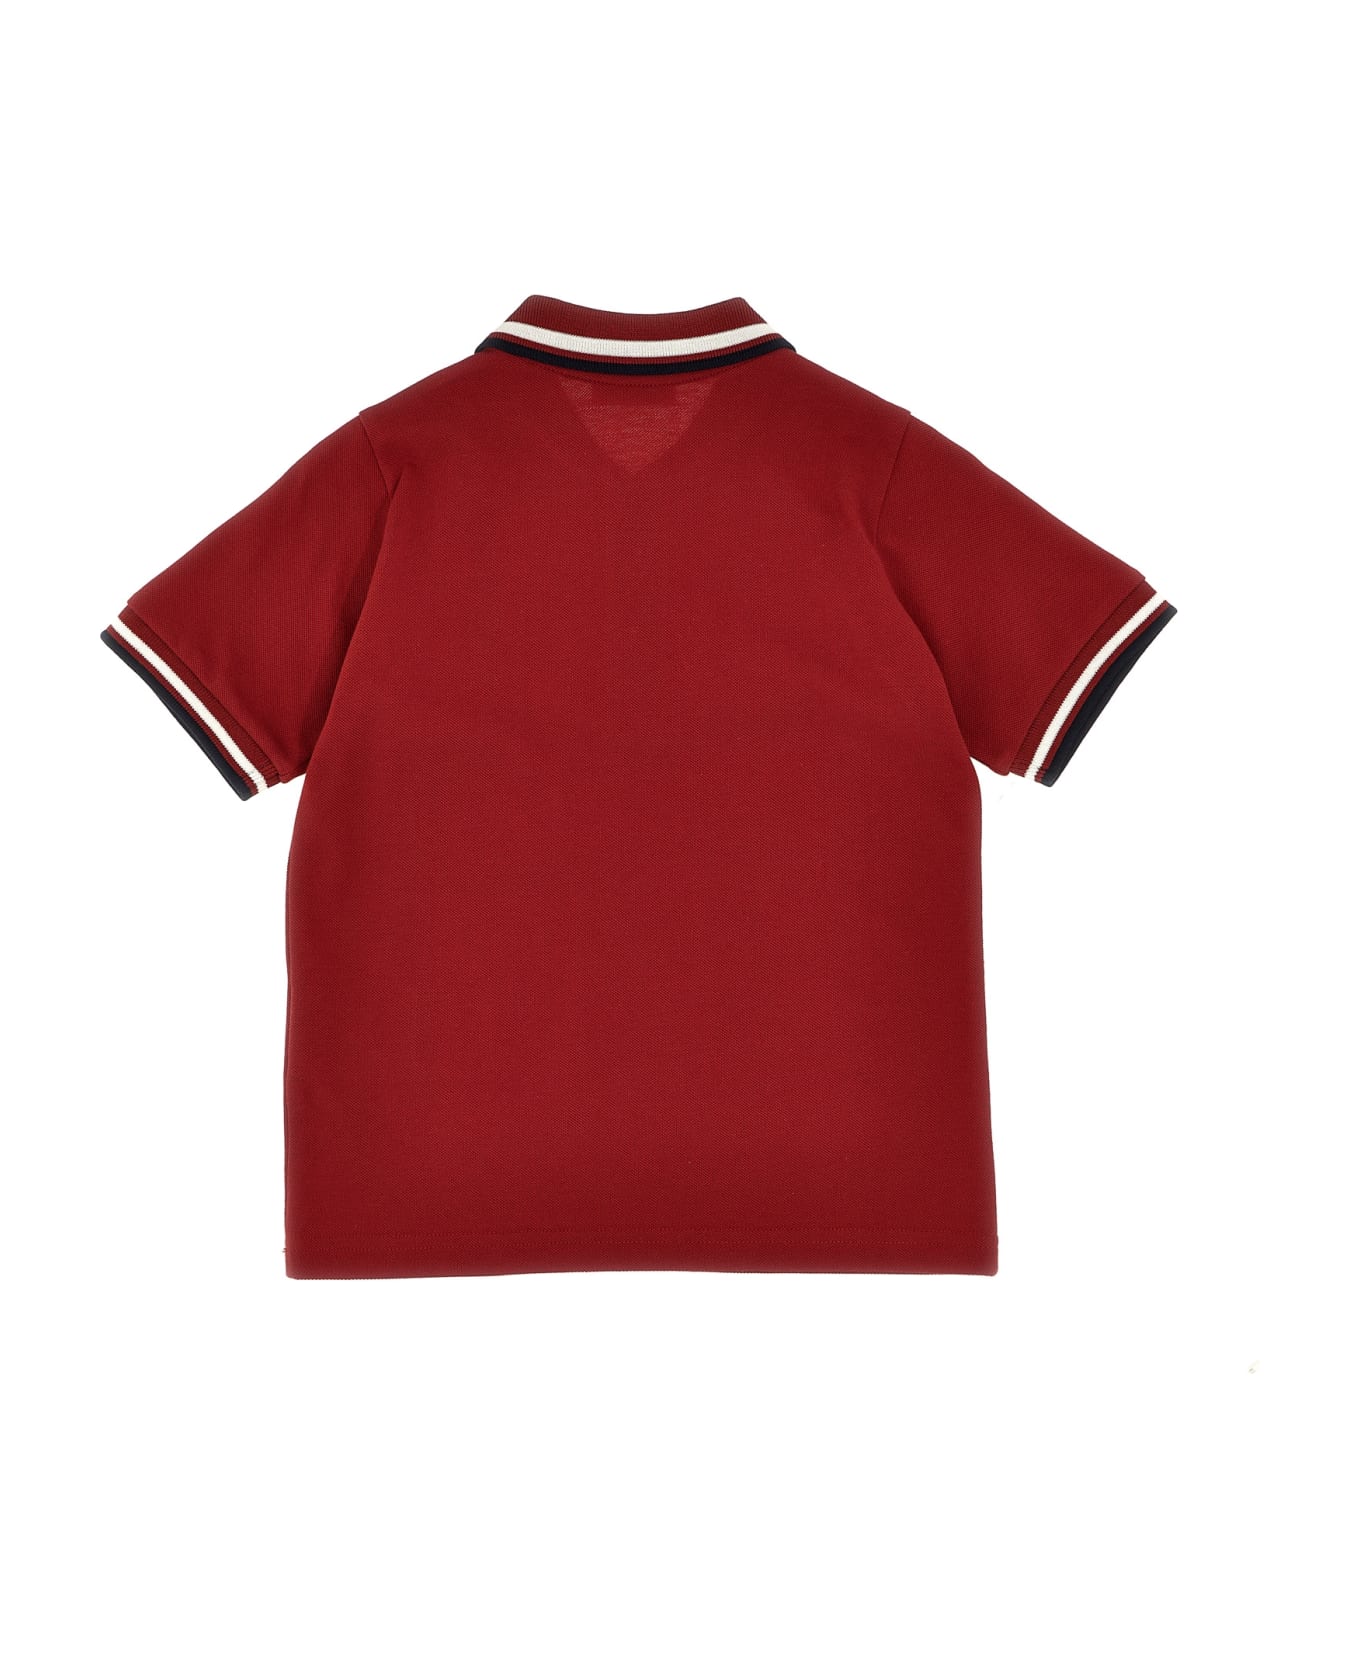 Moncler Logo Patch Polo Shirt - Red Tシャツ＆ポロシャツ